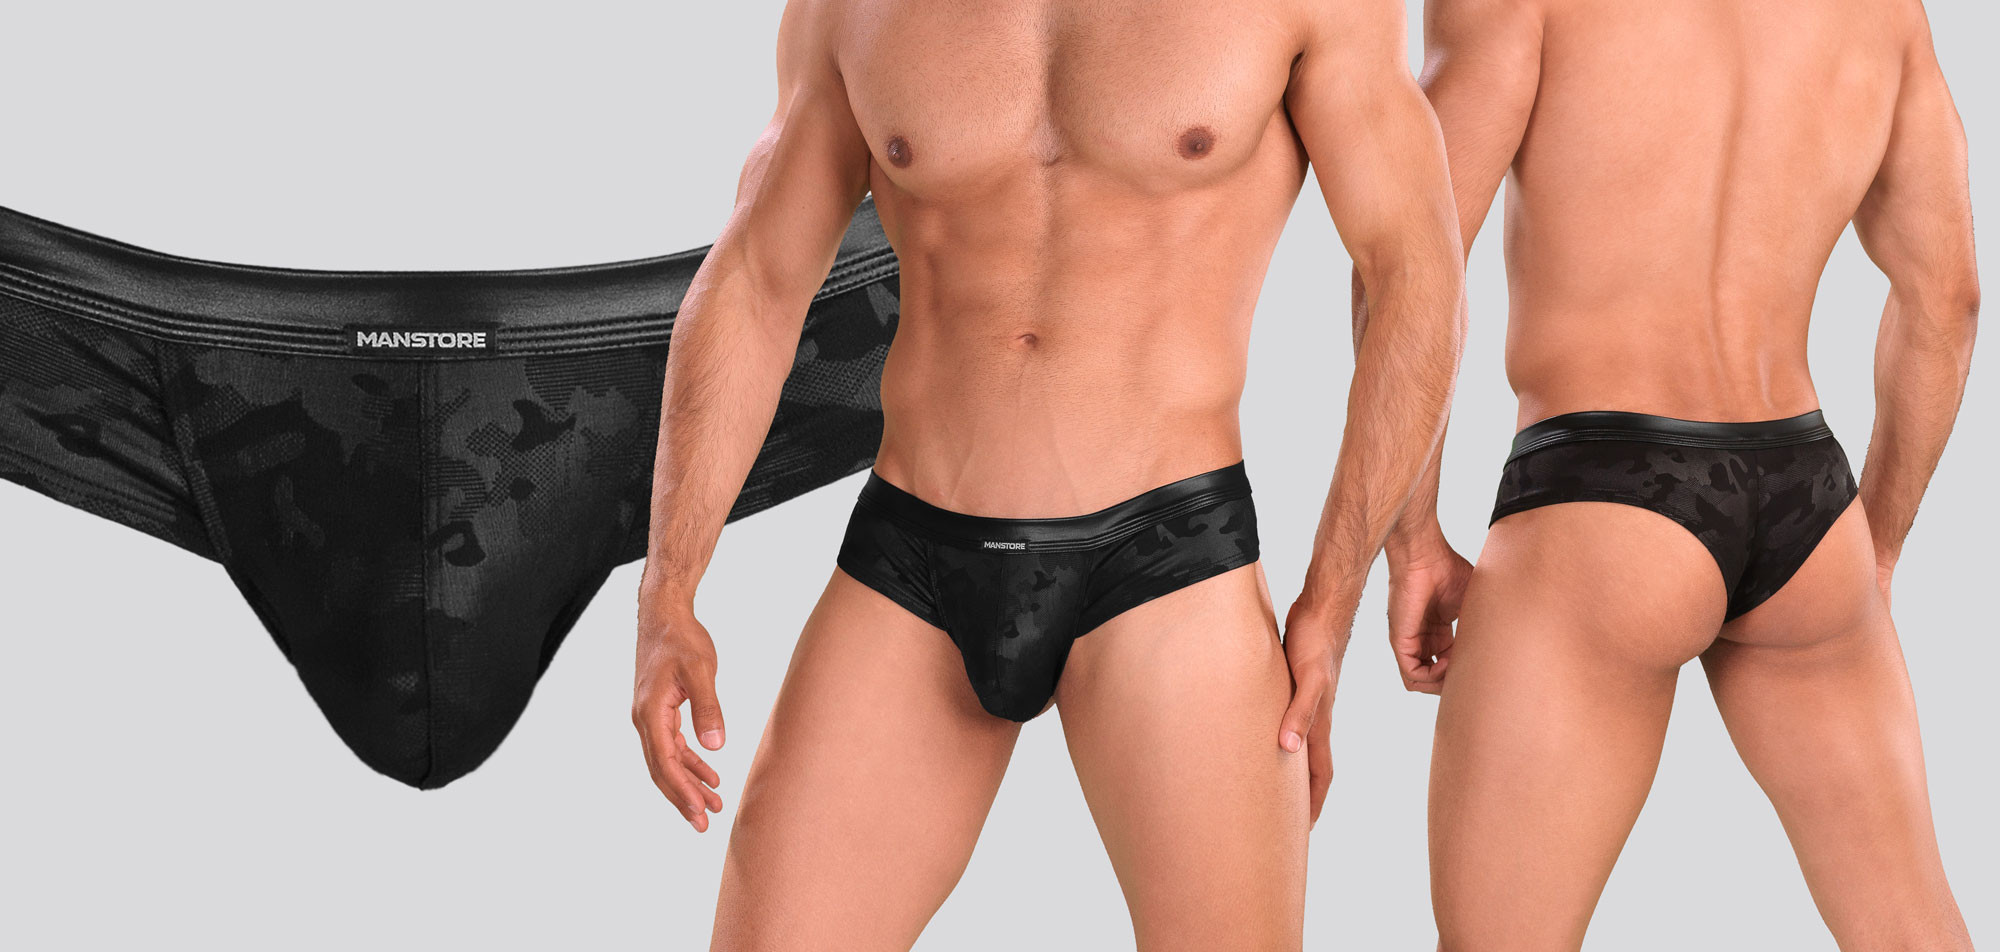 Manstore M2115 Cheeky Brief, color Nee